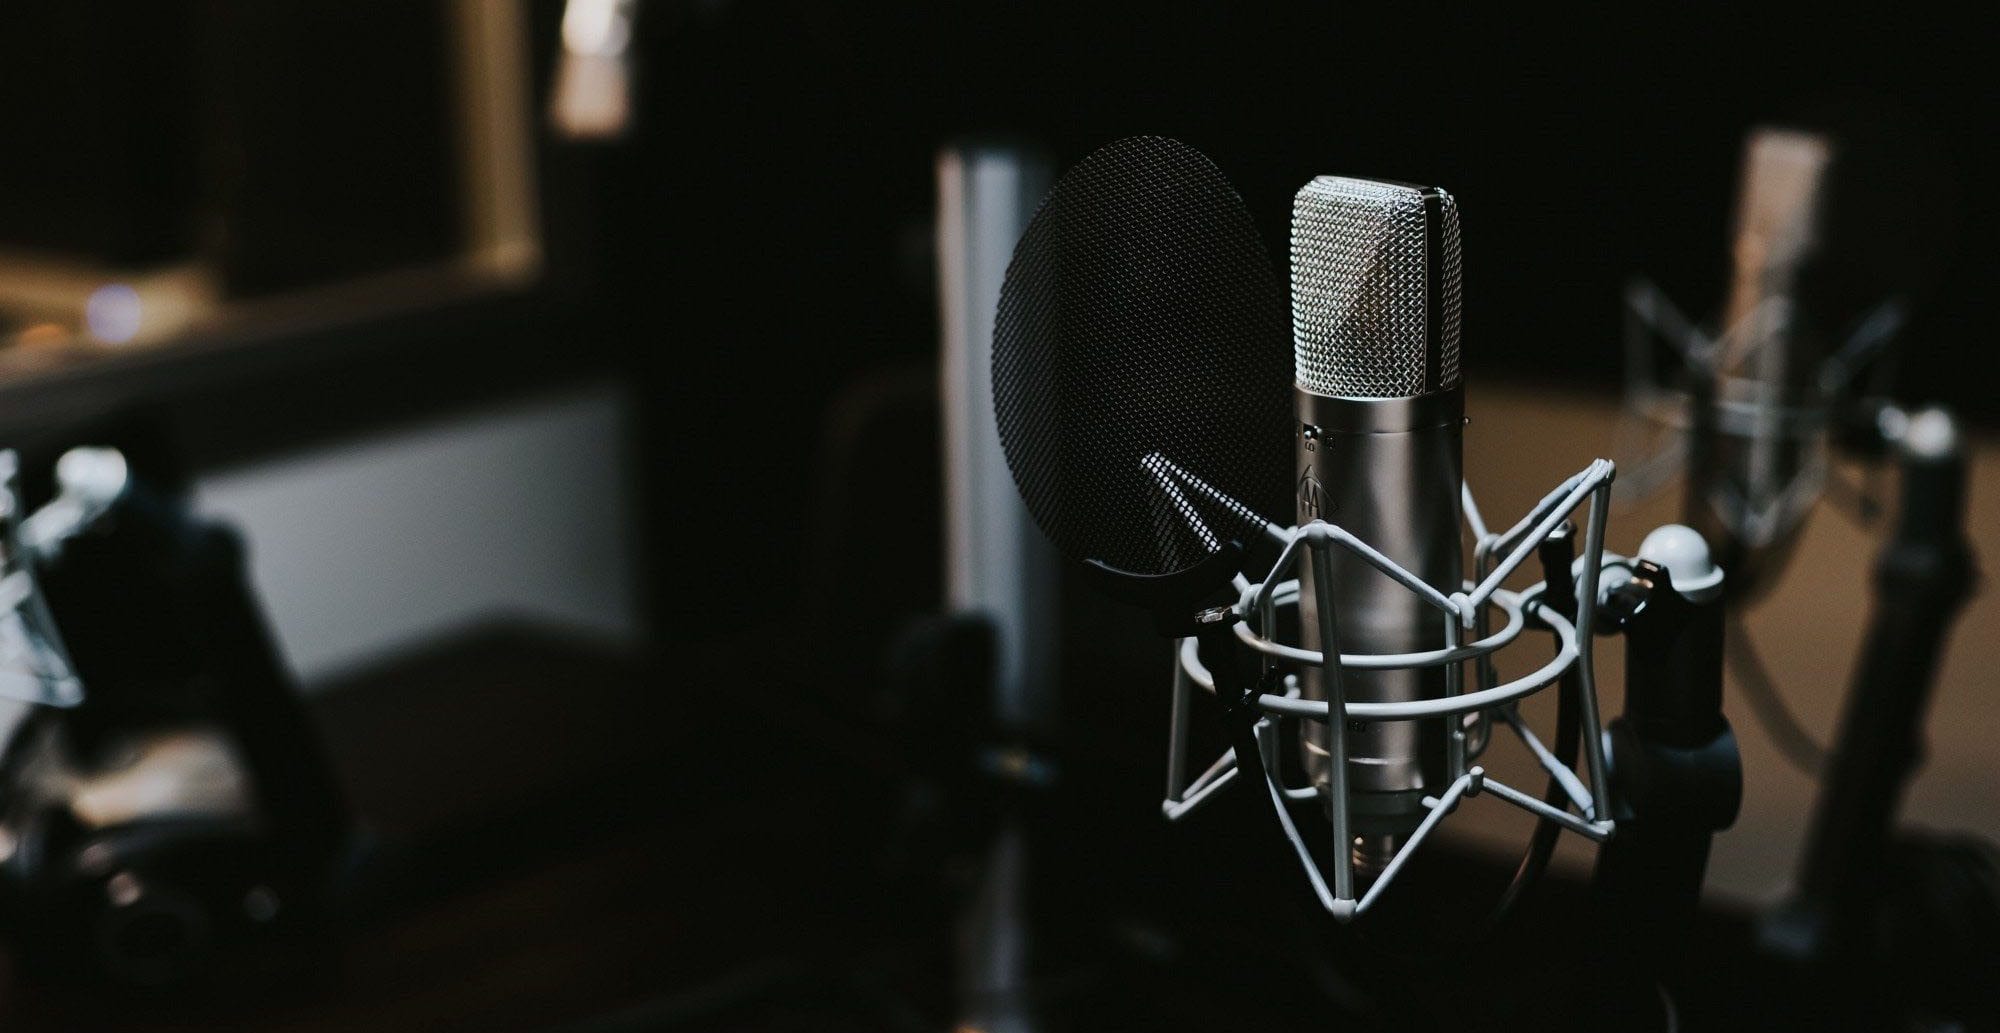 Podcasts are a great medium. If you’re looking for audio inspiration, here are some of the best podcasts for filmmakers and film buffs alike.